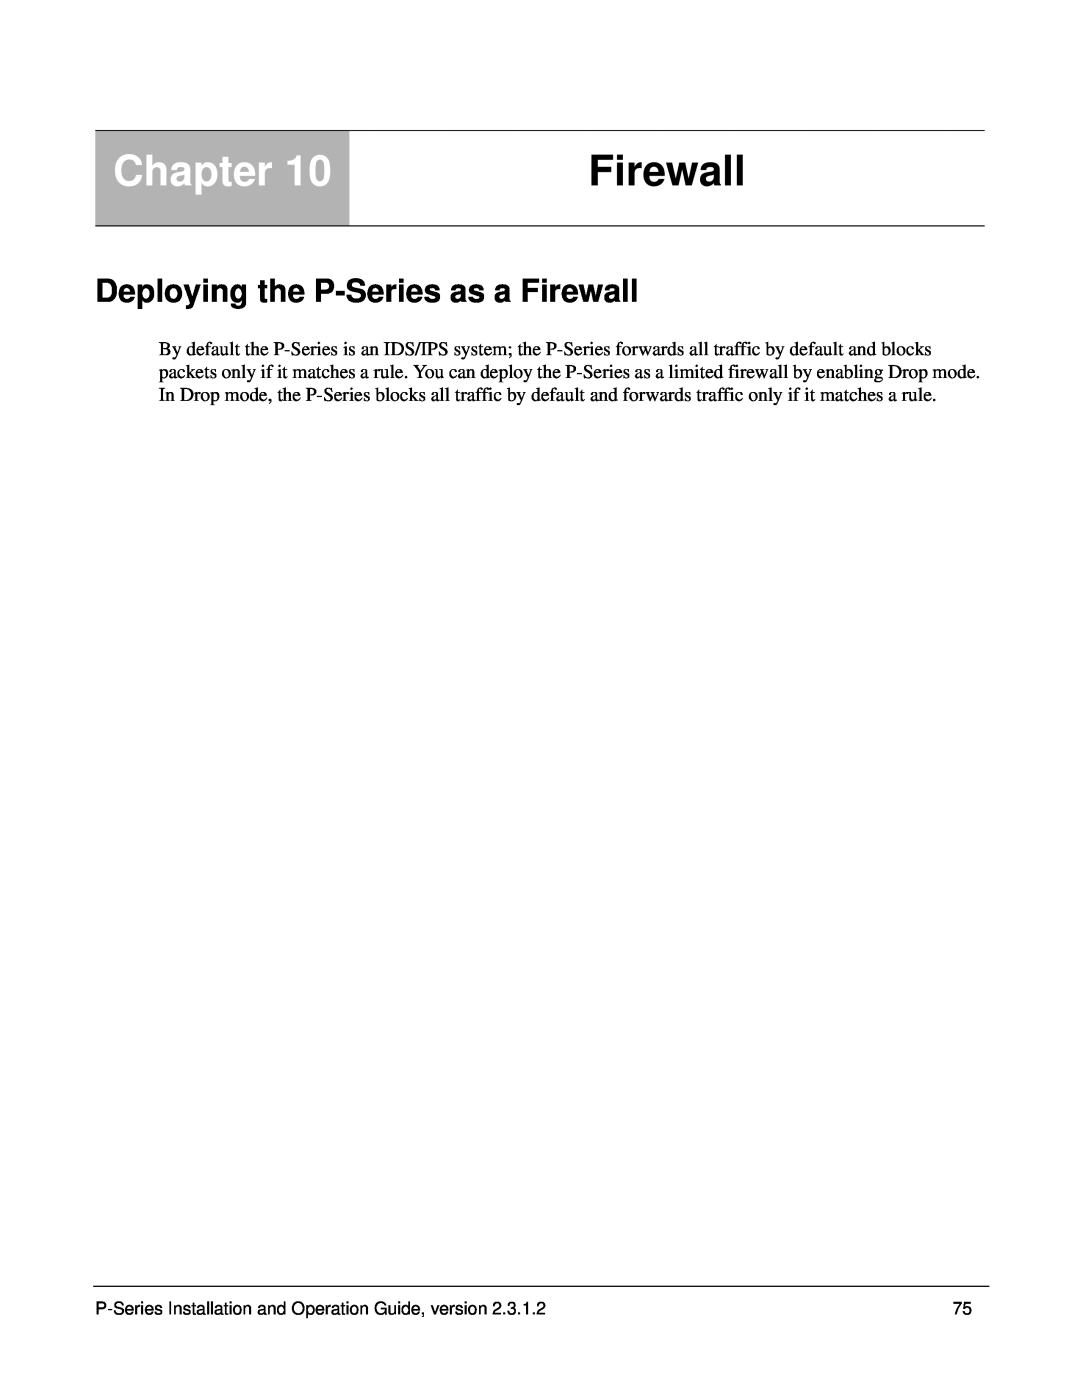 Force10 Networks 100-00055-01 manual Deploying the P-Series as a Firewall, Chapter 